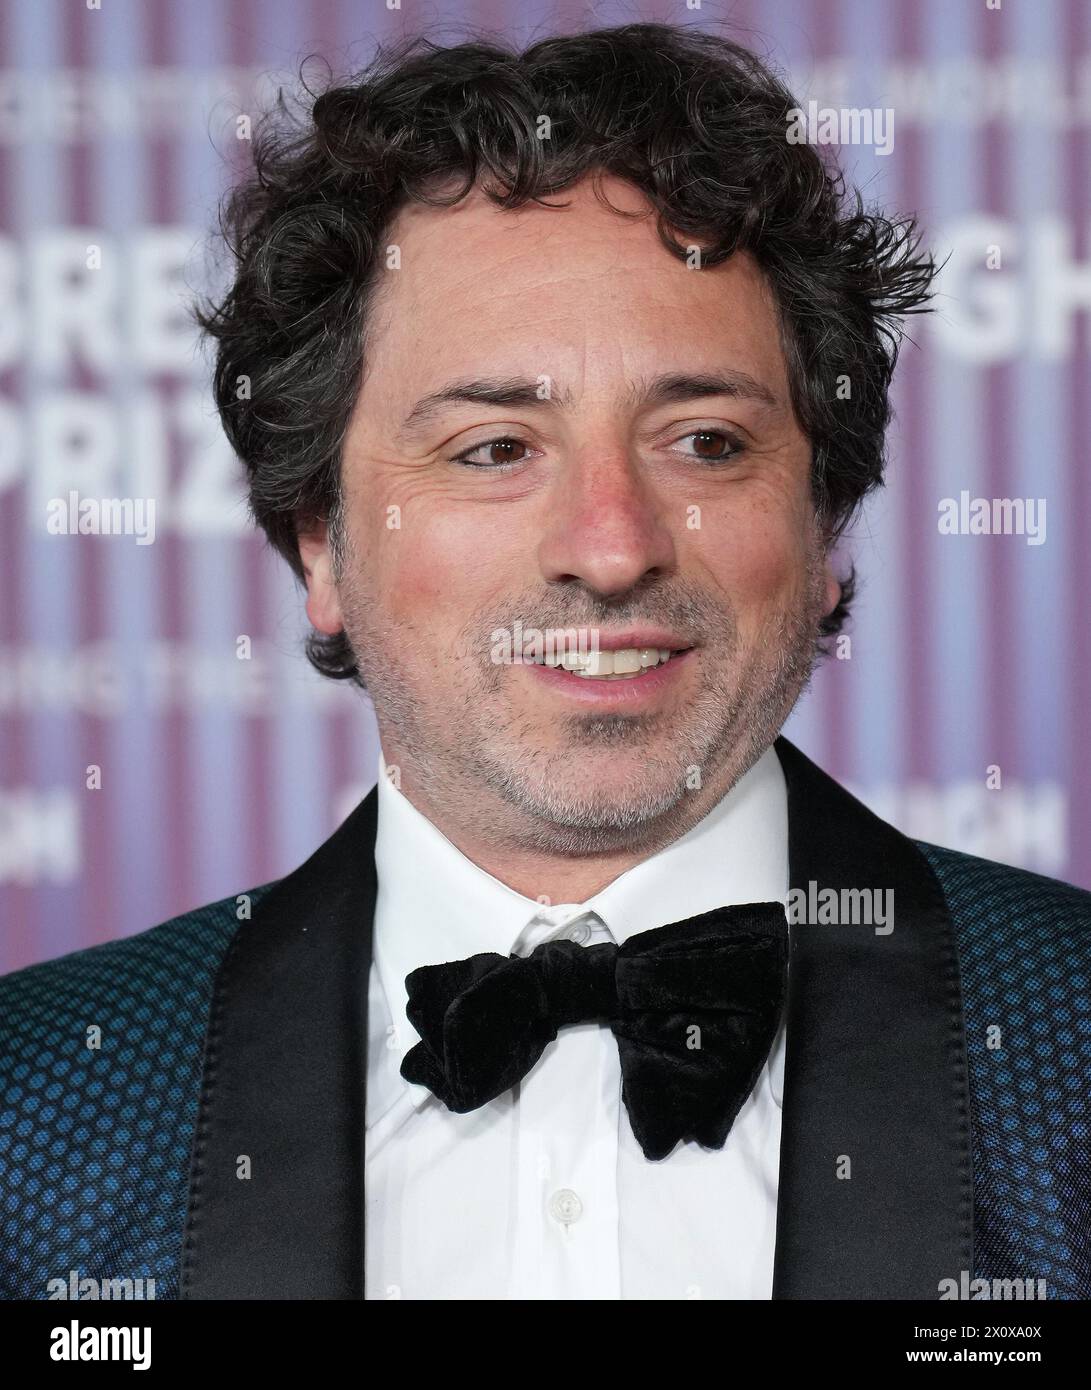 Co-Founder of GOOGLE and Founder of ALPHABET, Sergey Brin arrives at the 10th Annual Breakthrough Prize Ceremony held at the Academy Museum of Motion Picture in Los Angeles, CA on Saturday, ?April 13, 2024. (Photo By Sthanlee B. Mirador/Sipa USA) Stock Photo